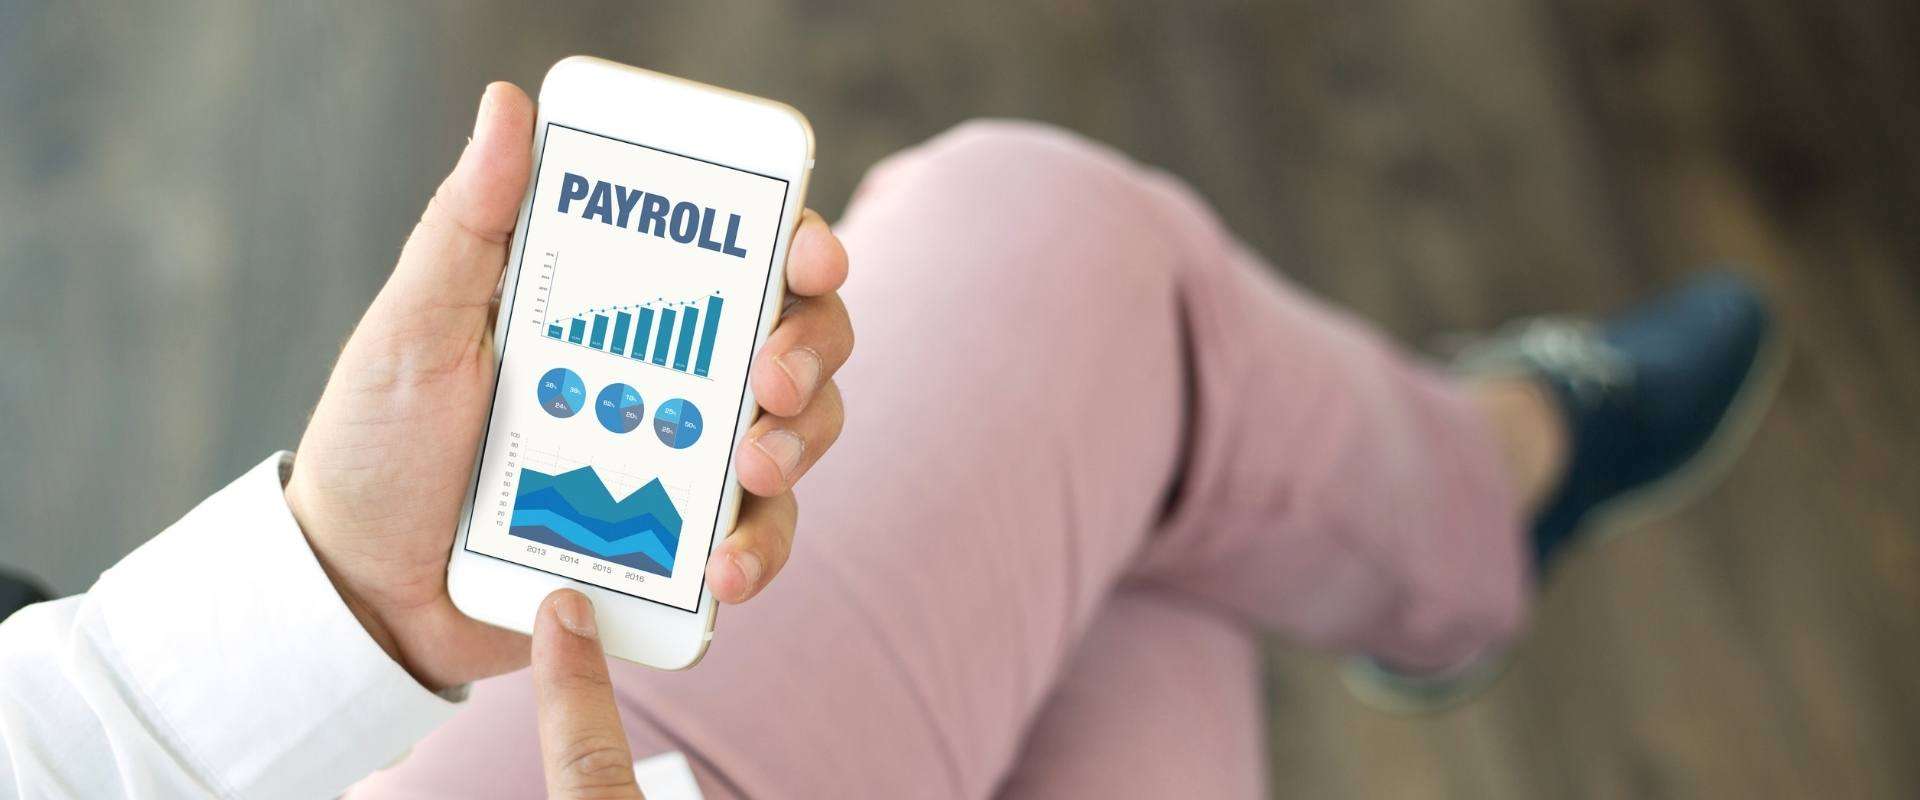 How To Improve The Quality Of Your Payroll Process Blog